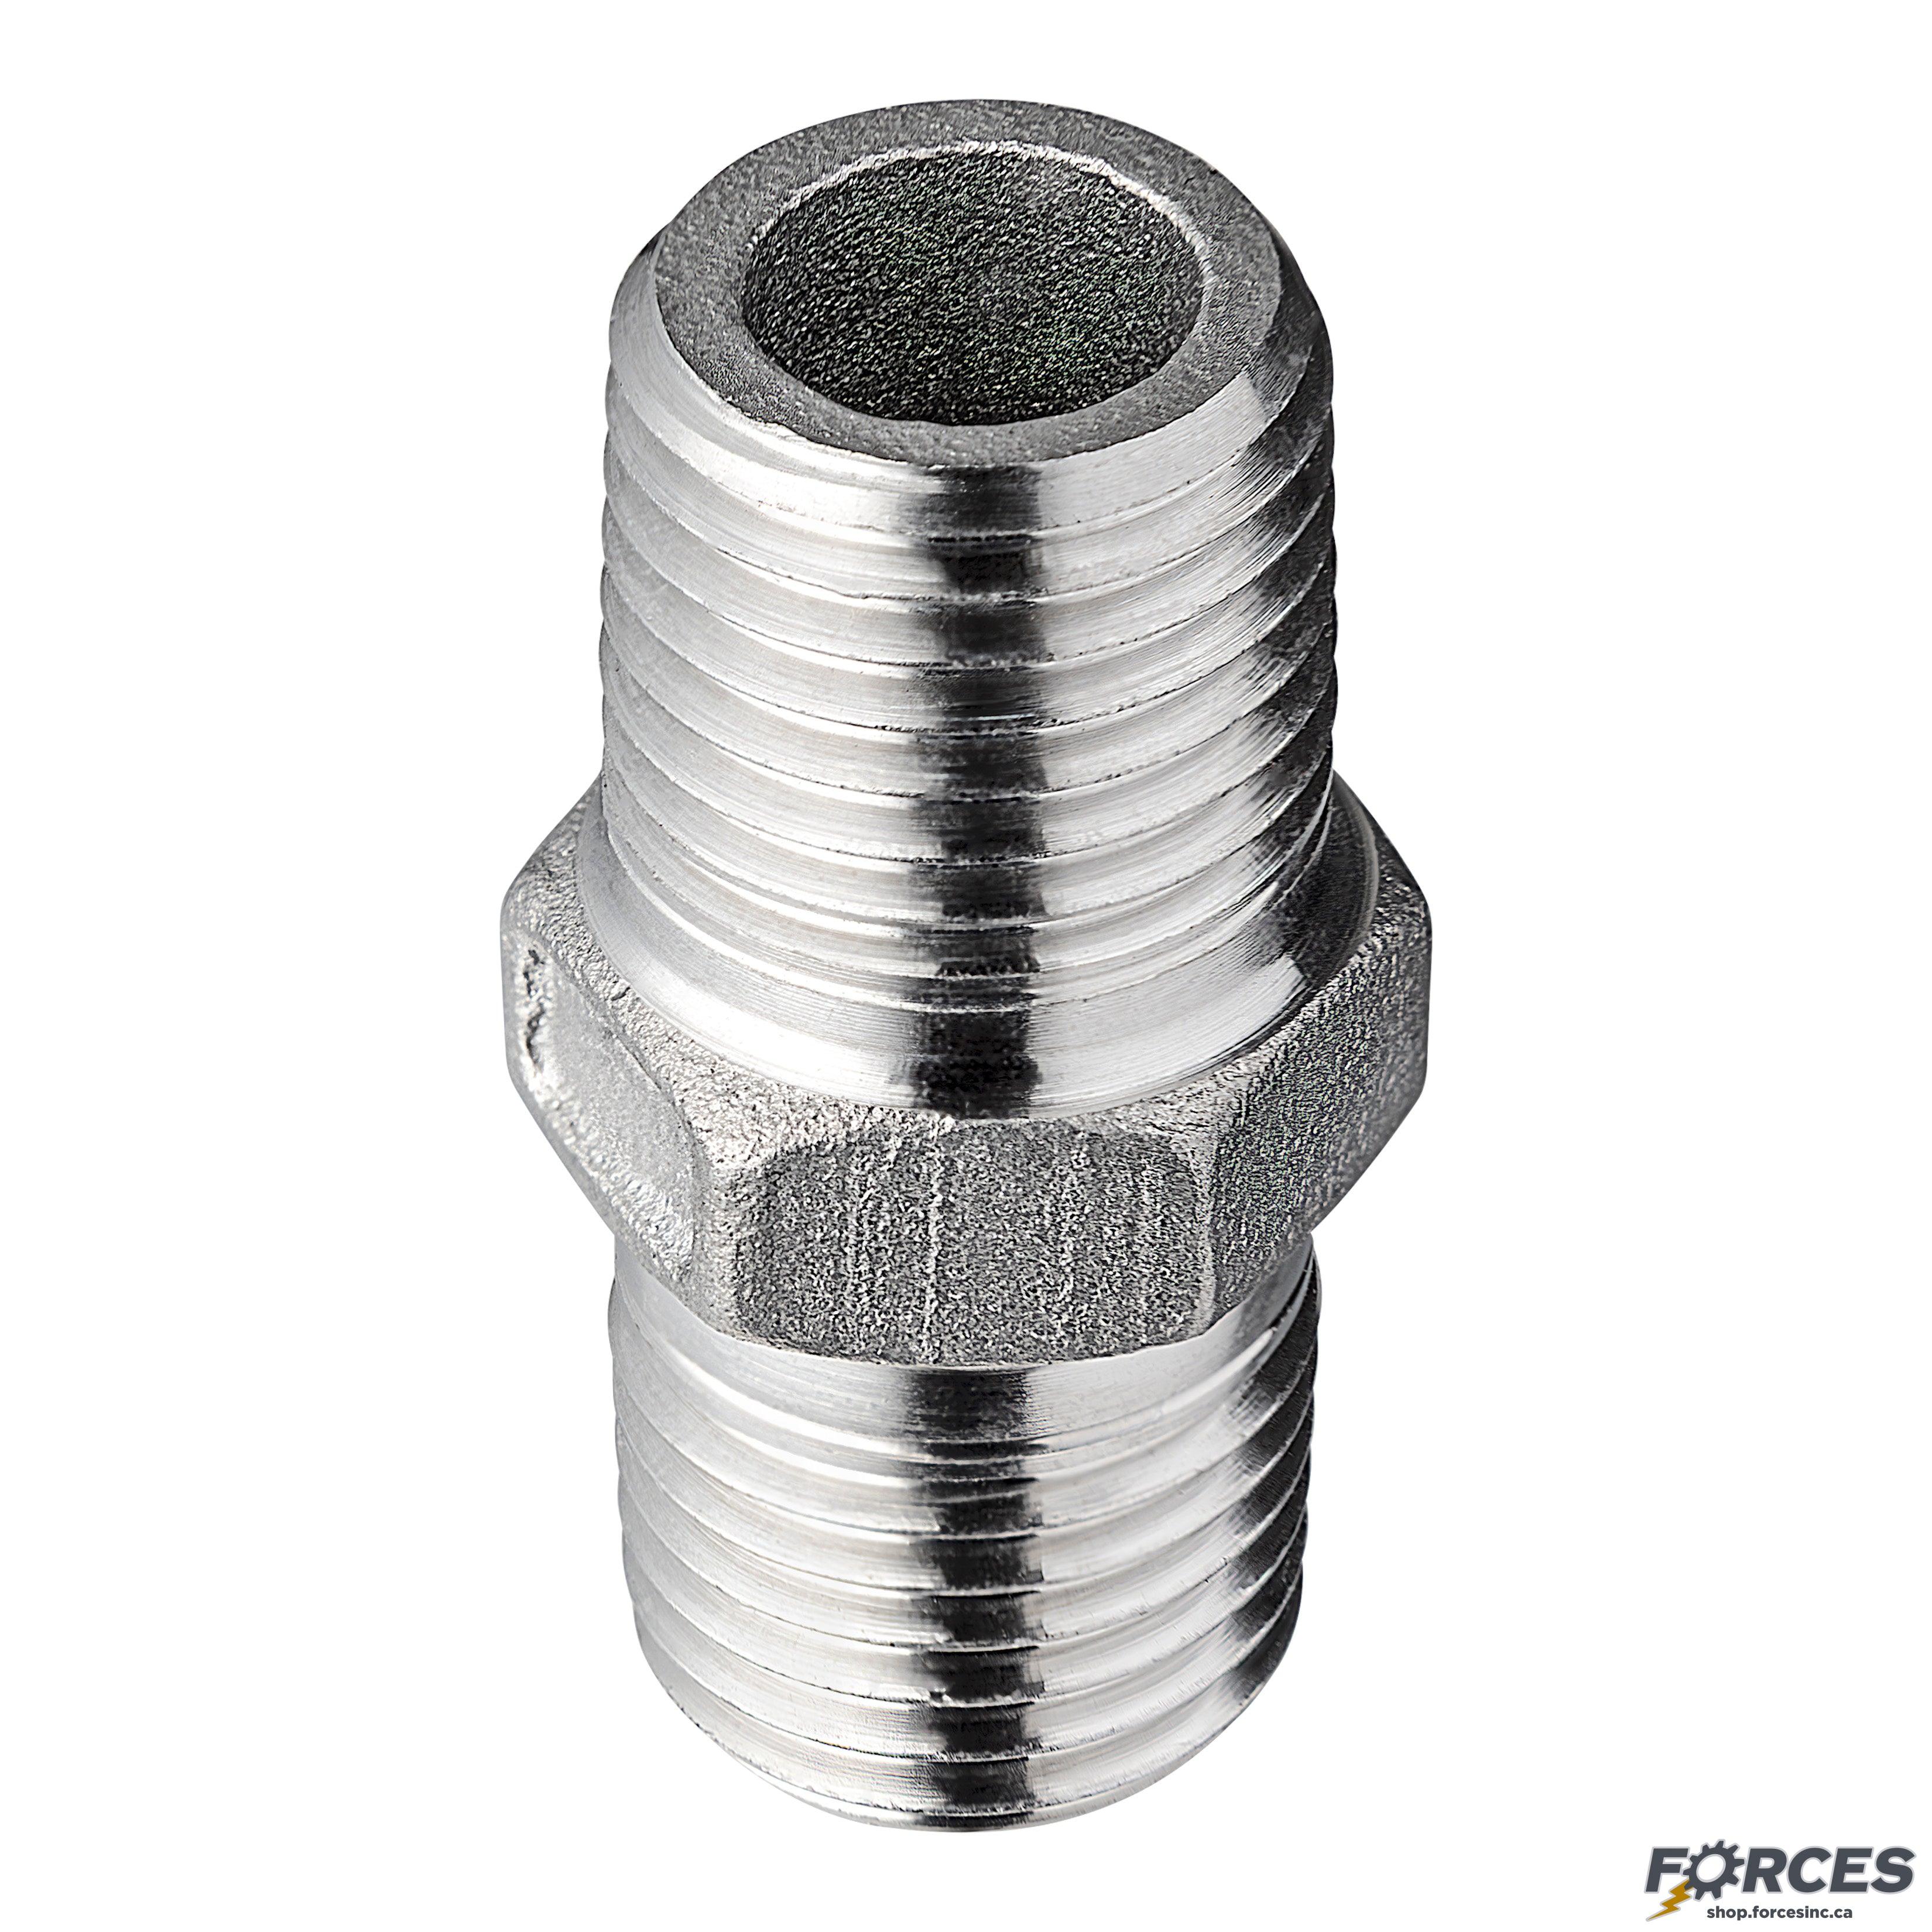 2" Hex Nipple - Stainless Steel 316 - Forces Inc